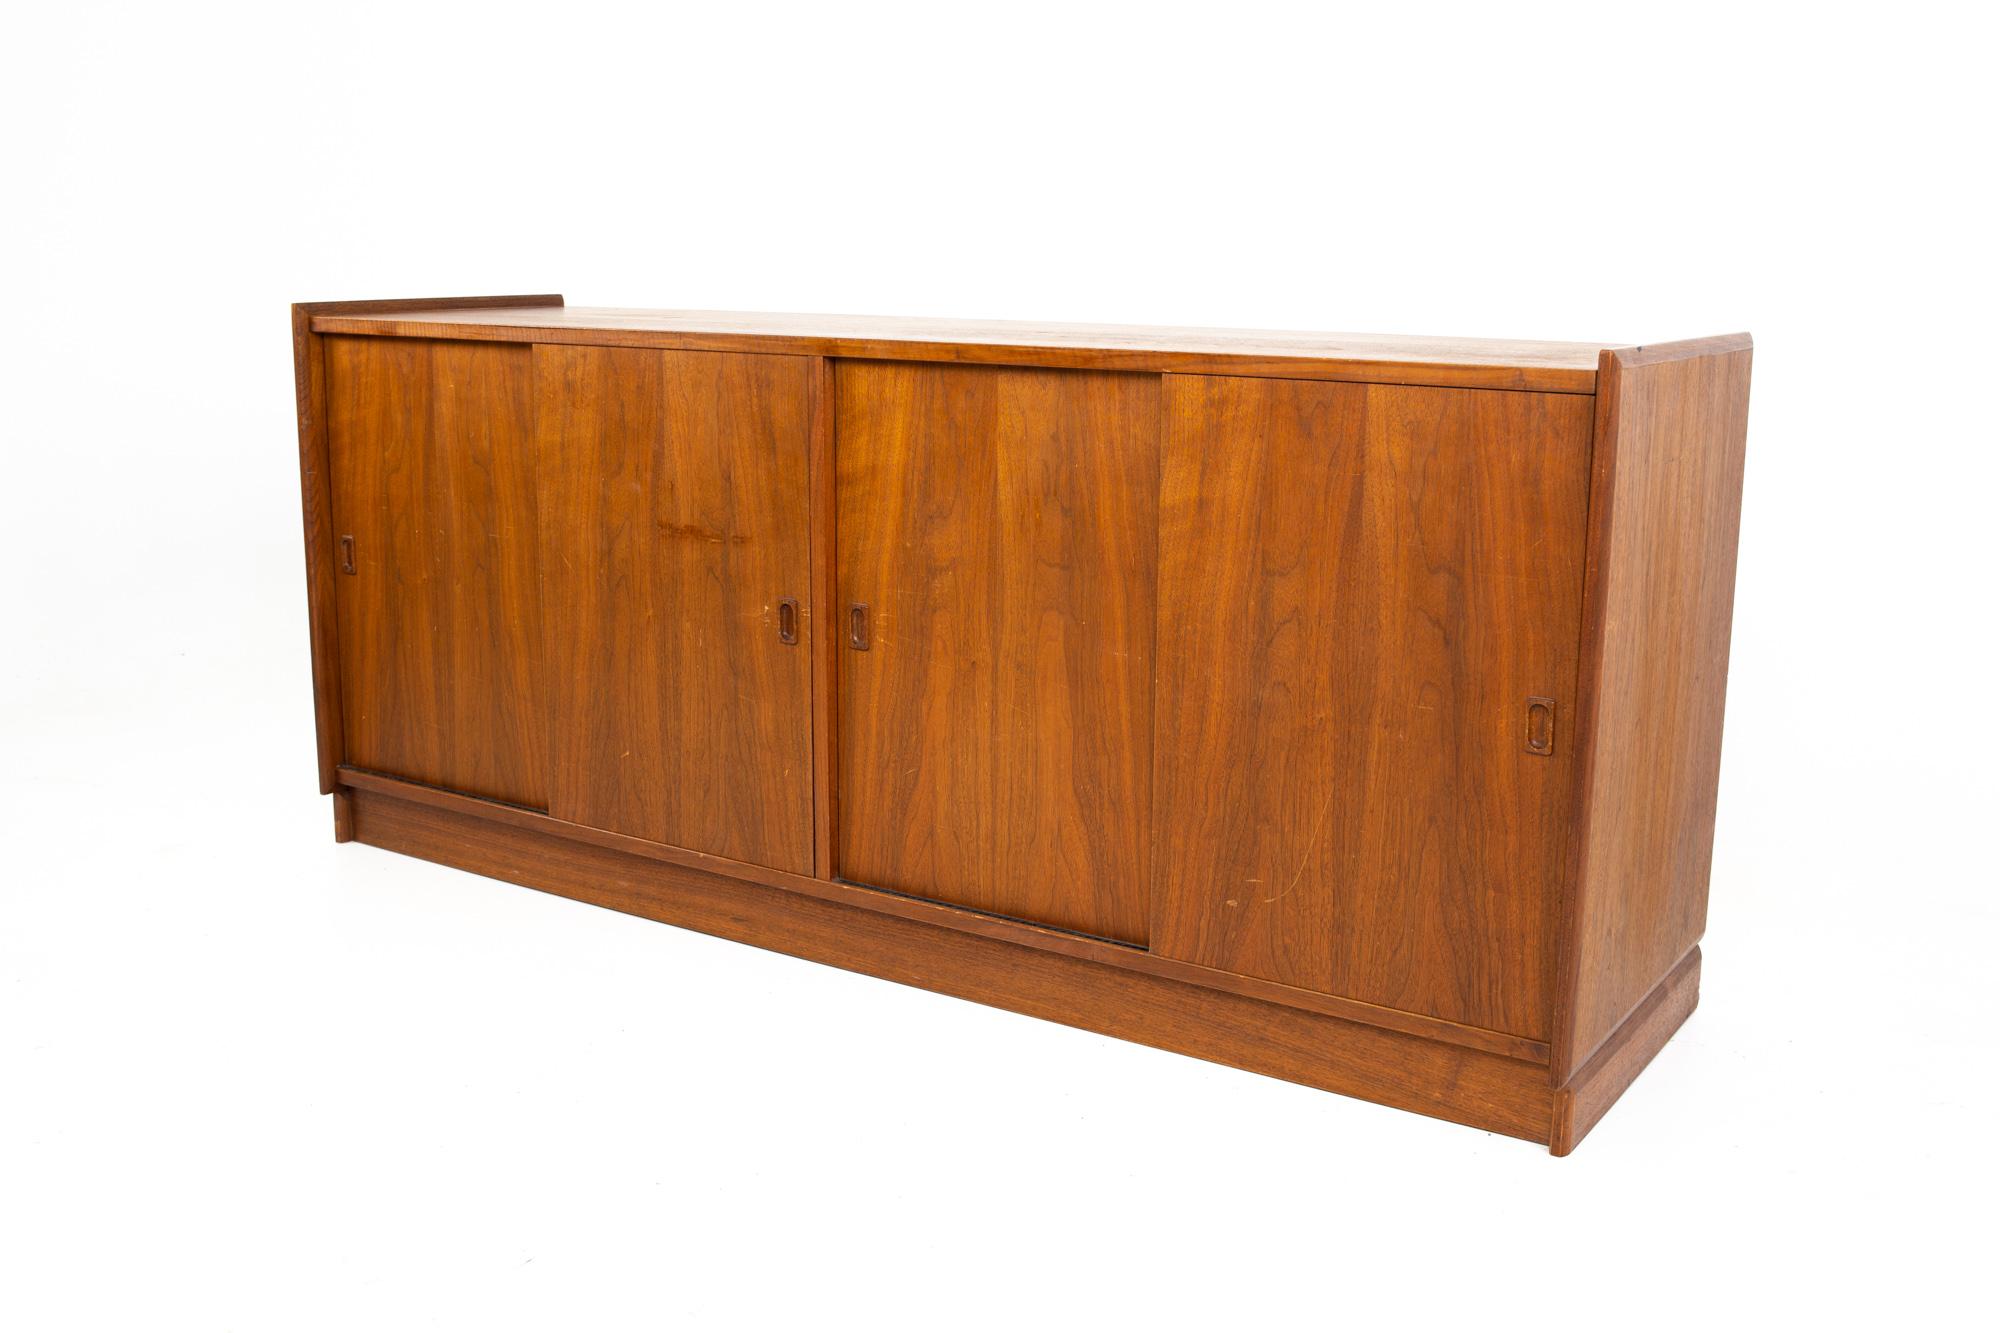 Mid century Danish walnut floating sliding door credenza
Credenza measures: 64.75 wide x 18.25 deep x 27.75 inches high

All pieces of furniture can be had in what we call restored vintage condition. That means the piece is restored upon purchase